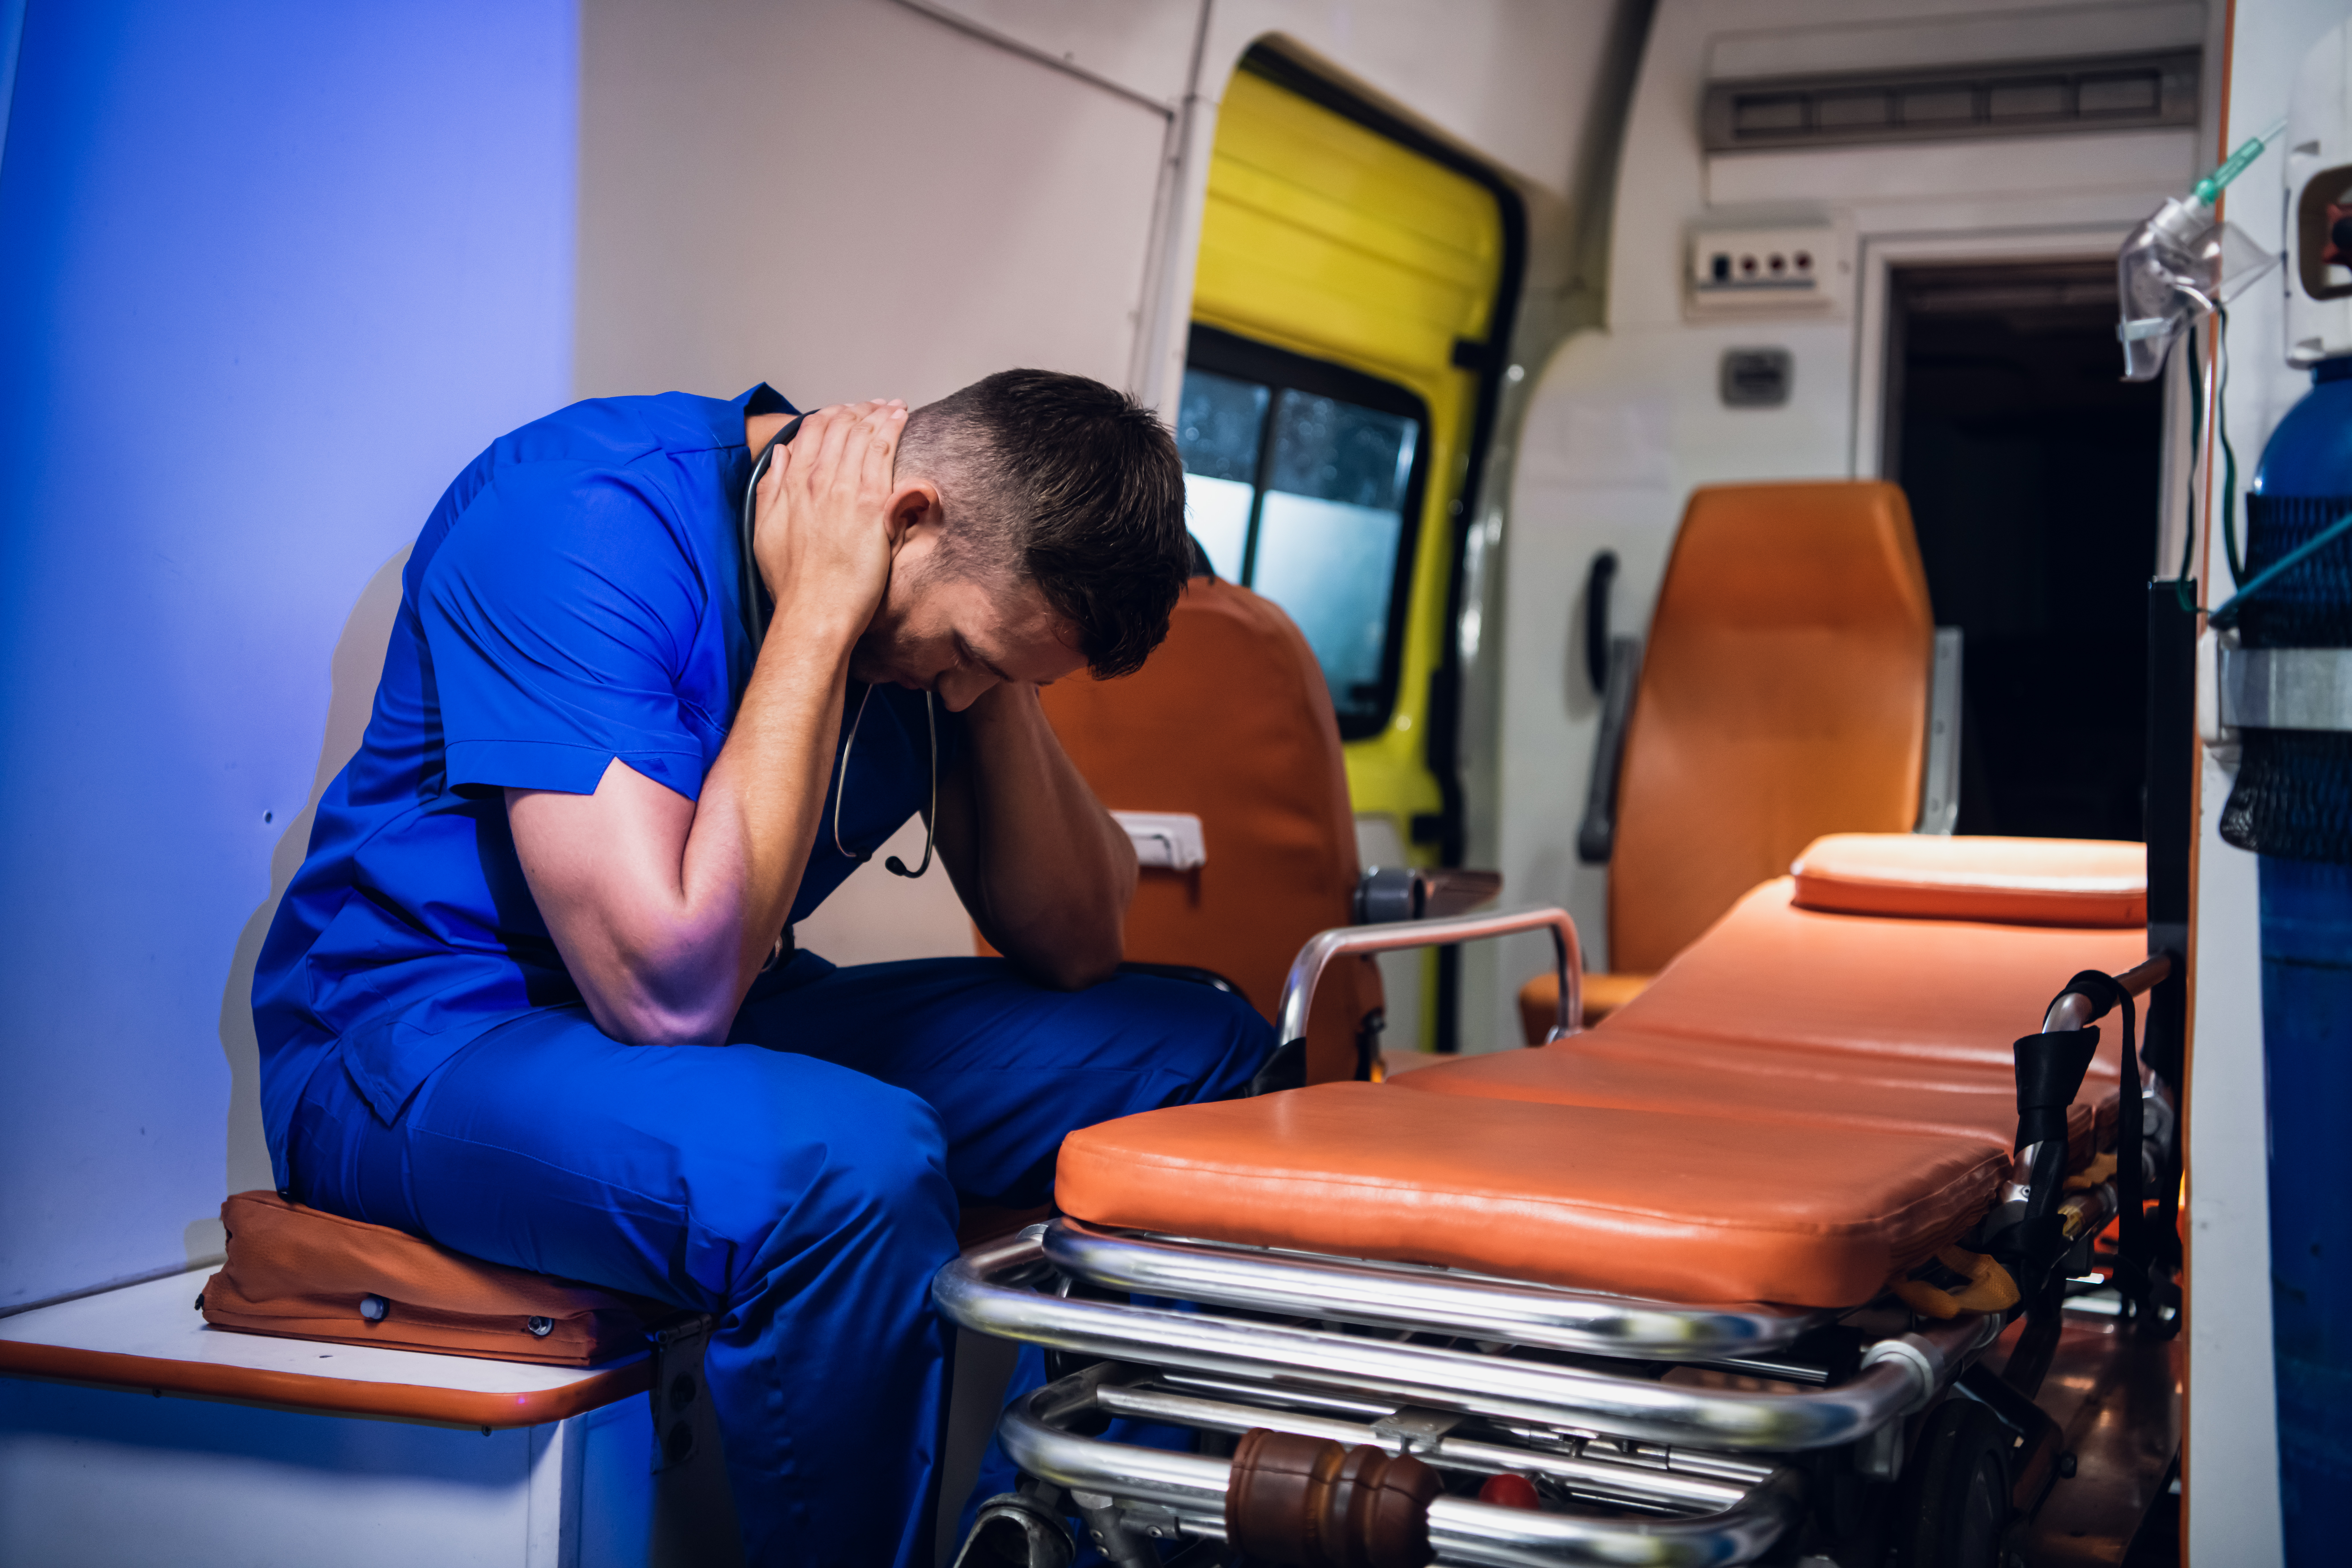 An exhausted paramedic having a little break by sitting in an ambulance with his hands around his neck | Source: Shutterstock